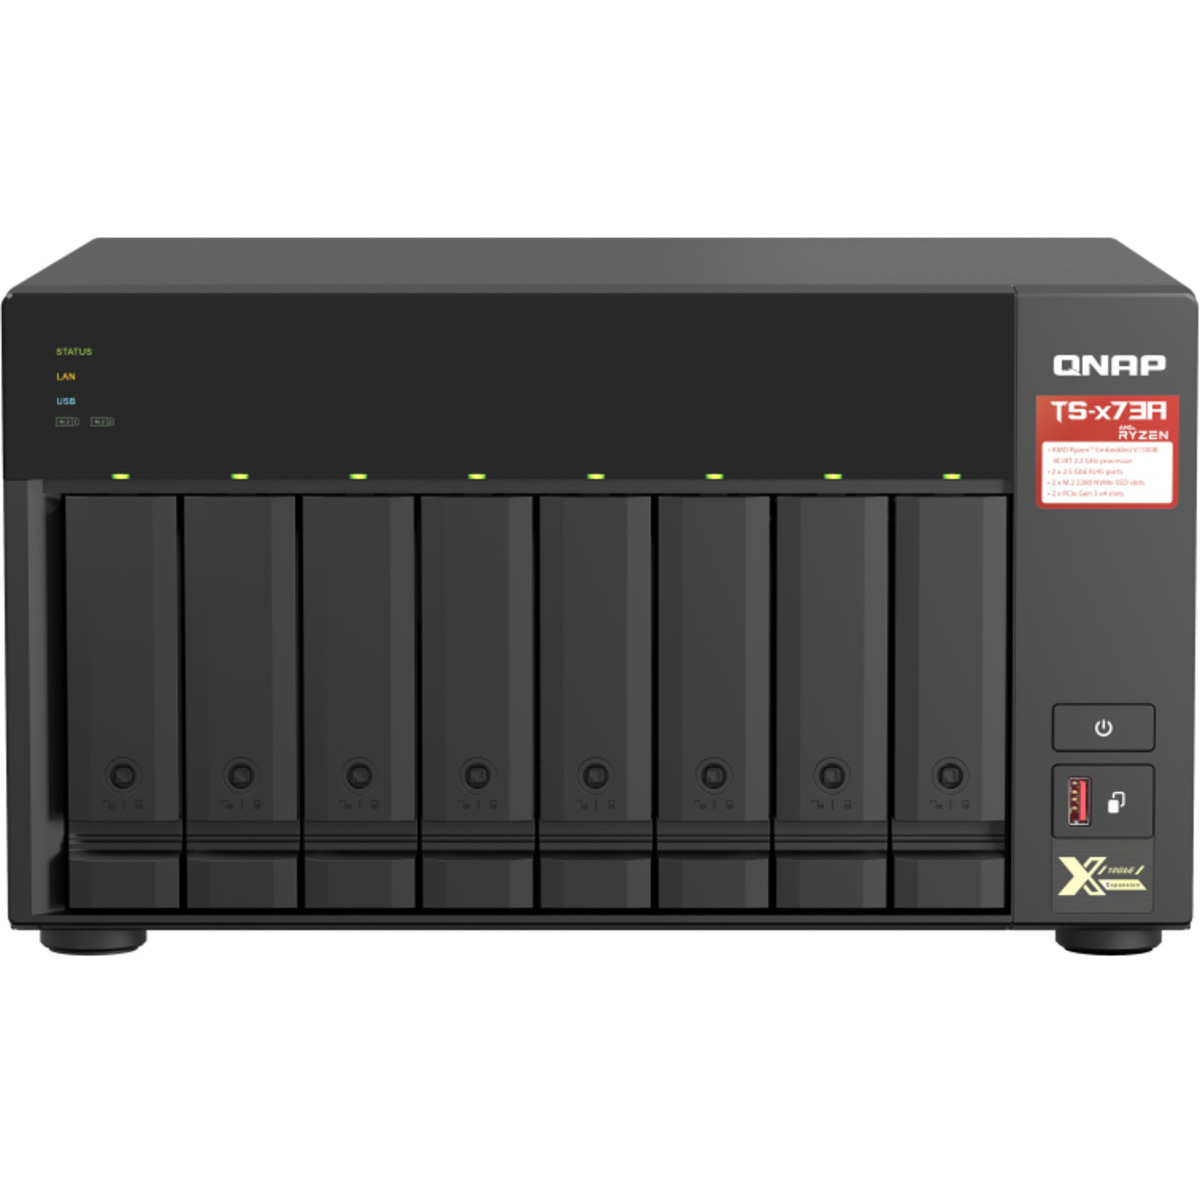 buy $4981 QNAP TS-873A 144tb Desktop NAS - Network Attached Storage Device 8x18000gb Toshiba Enterprise Capacity MG09ACA18TE 3.5 7200rpm SATA 6Gb/s HDD ENTERPRISE Class Drives Installed - Burn-In Tested - nas headquarters buy network attached storage server device das new raid-5 free shipping usa christmas new year holiday sale TS-873A